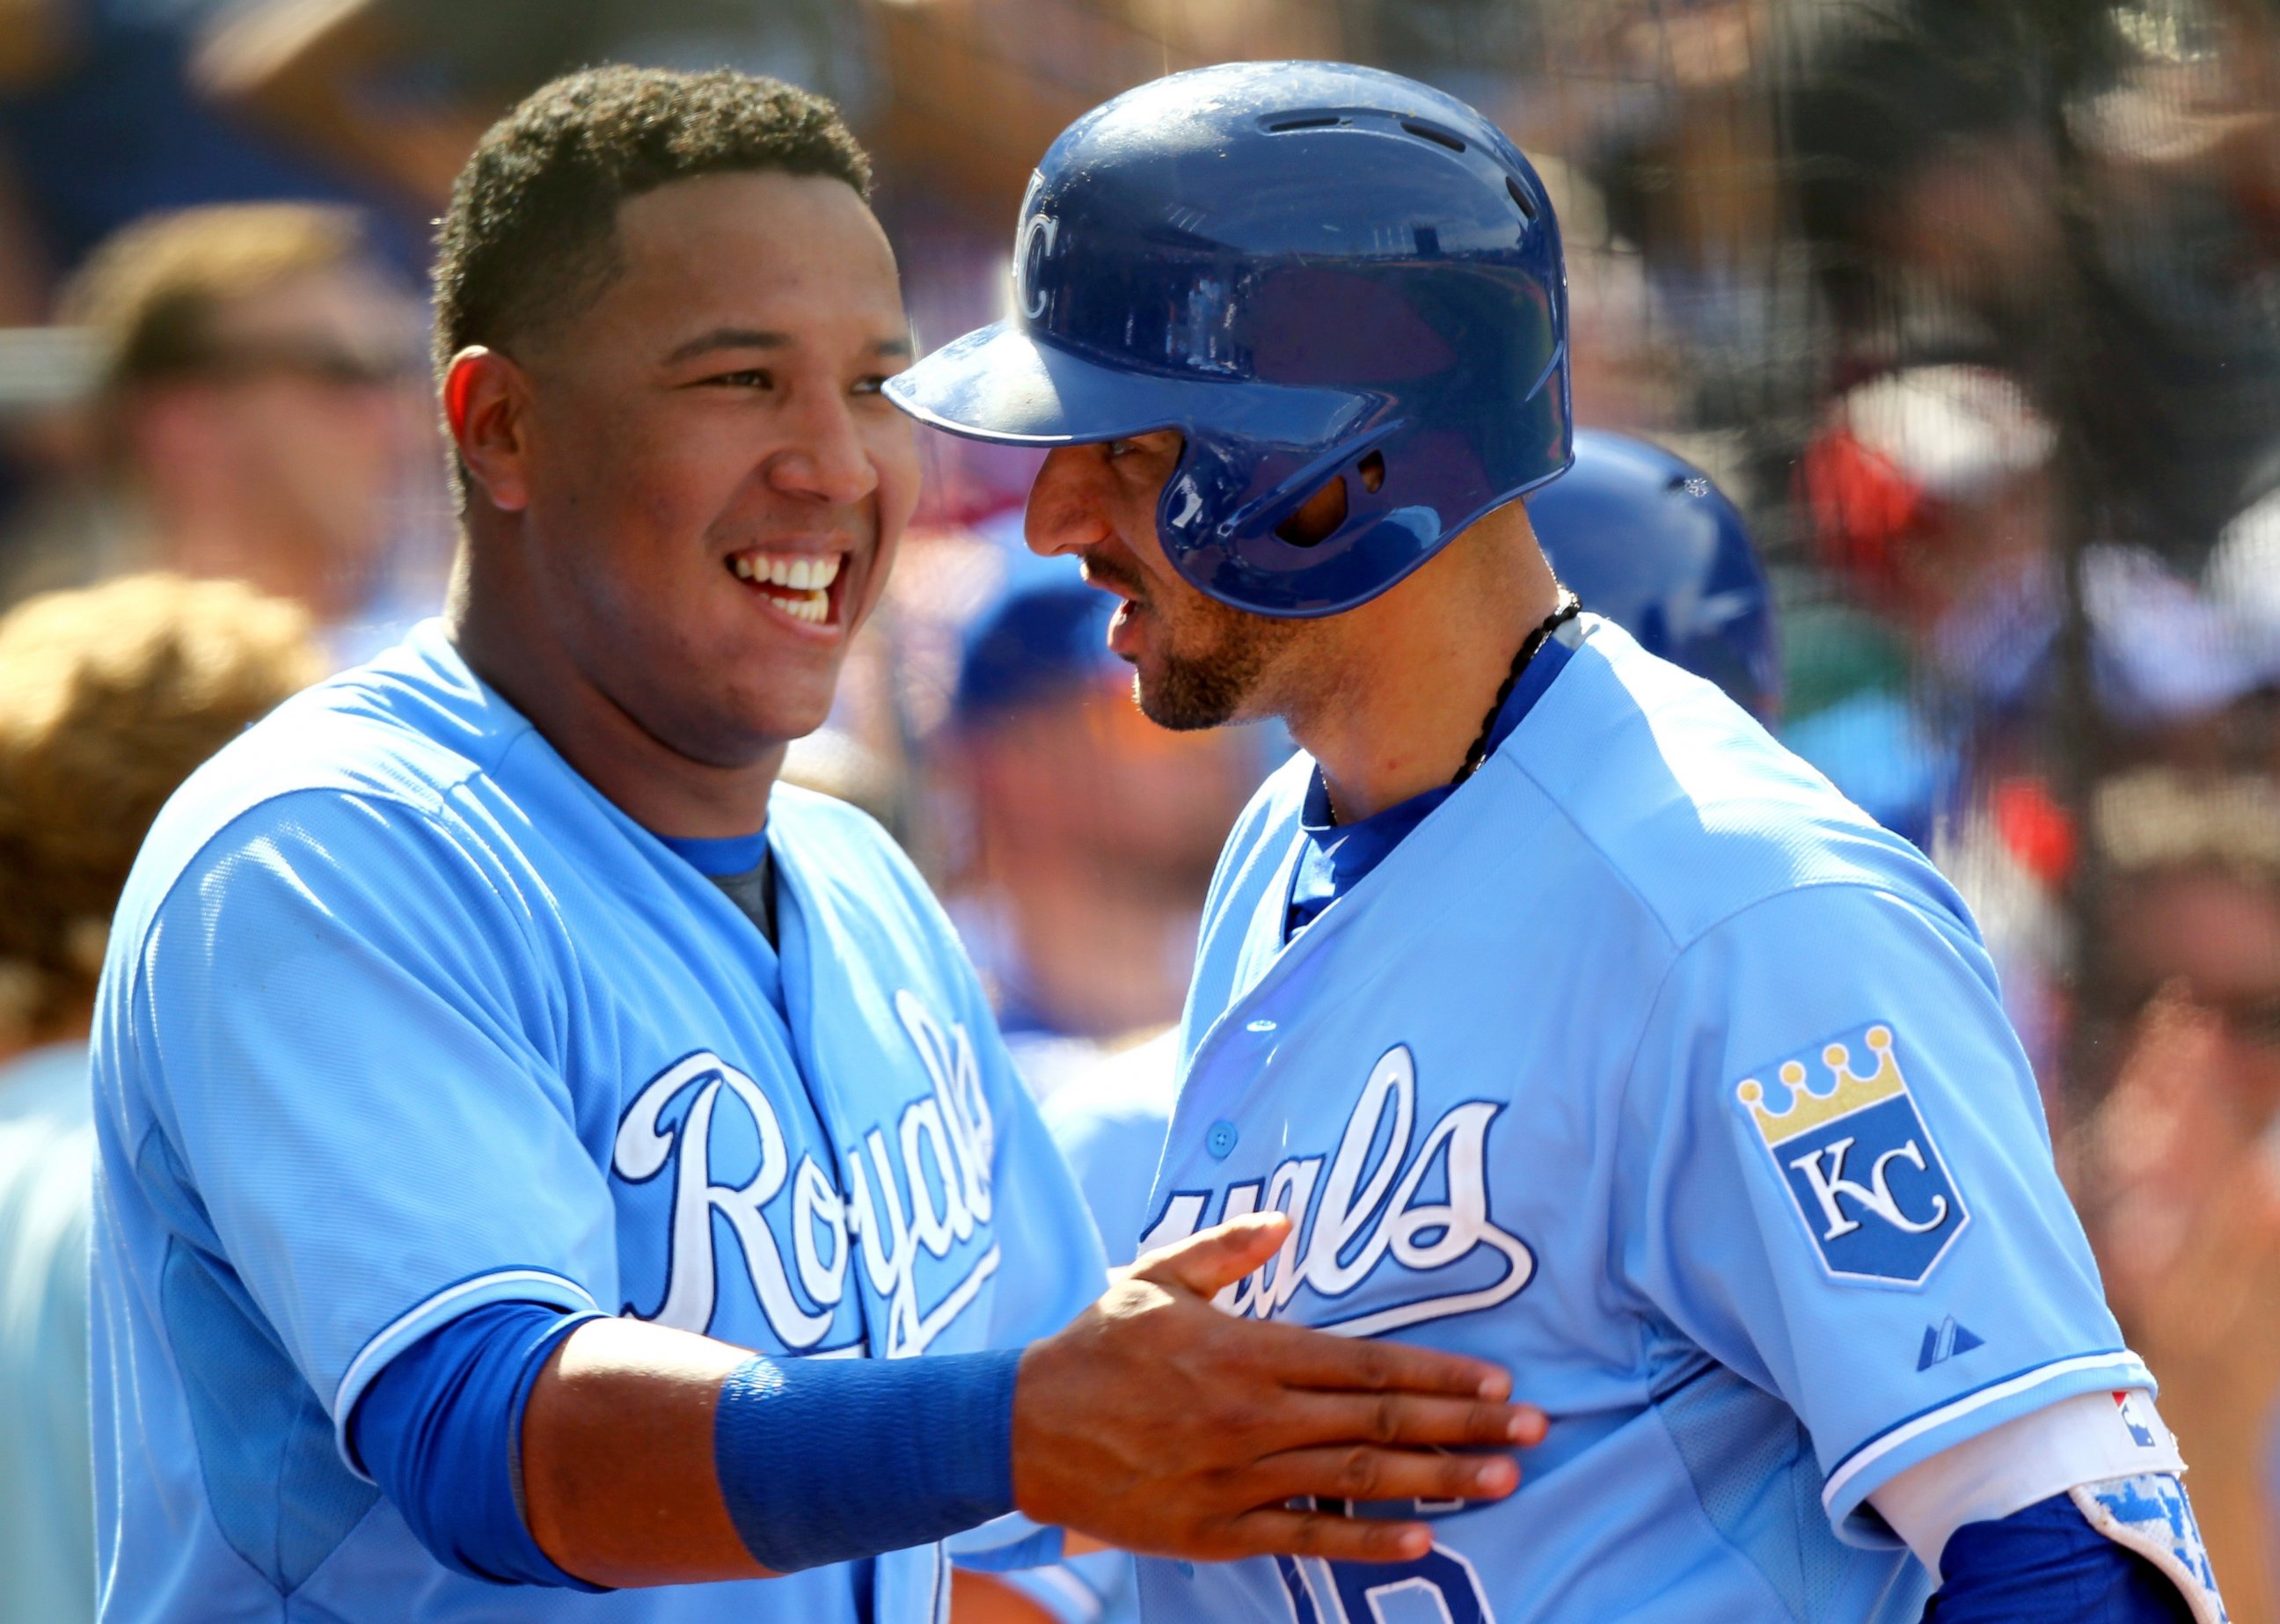 PHOTO: Paulo Orlando #16 of the Kansas City Royals is congratulated by Salvador Perez #13 after hitting a solo home run against the Toronto Blue Jays at Kauffman Stadium, July 12, 2015, in Kansas City, Missouri.